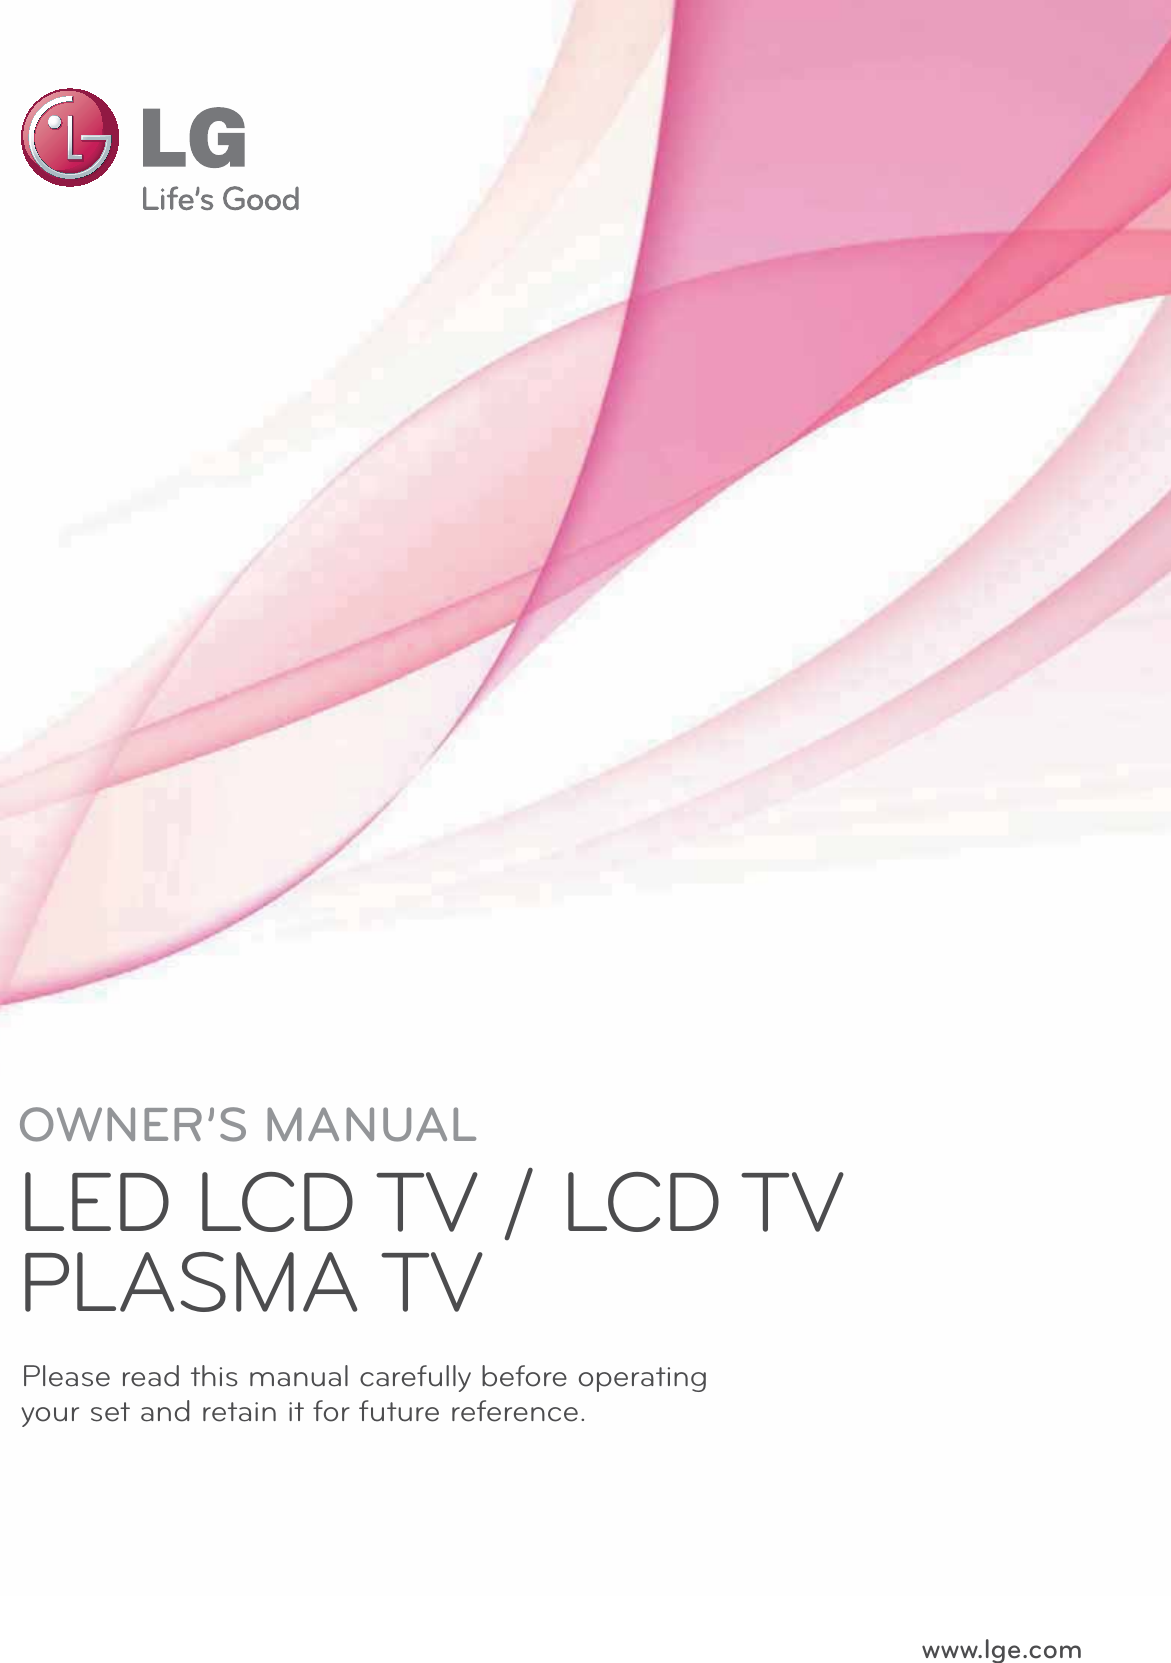 www.lge.comOWNER’S MANUALLED LCD TV / LCD TV PLASMA TV  Please read this manual carefully before operatingyour set and retain it for future reference.